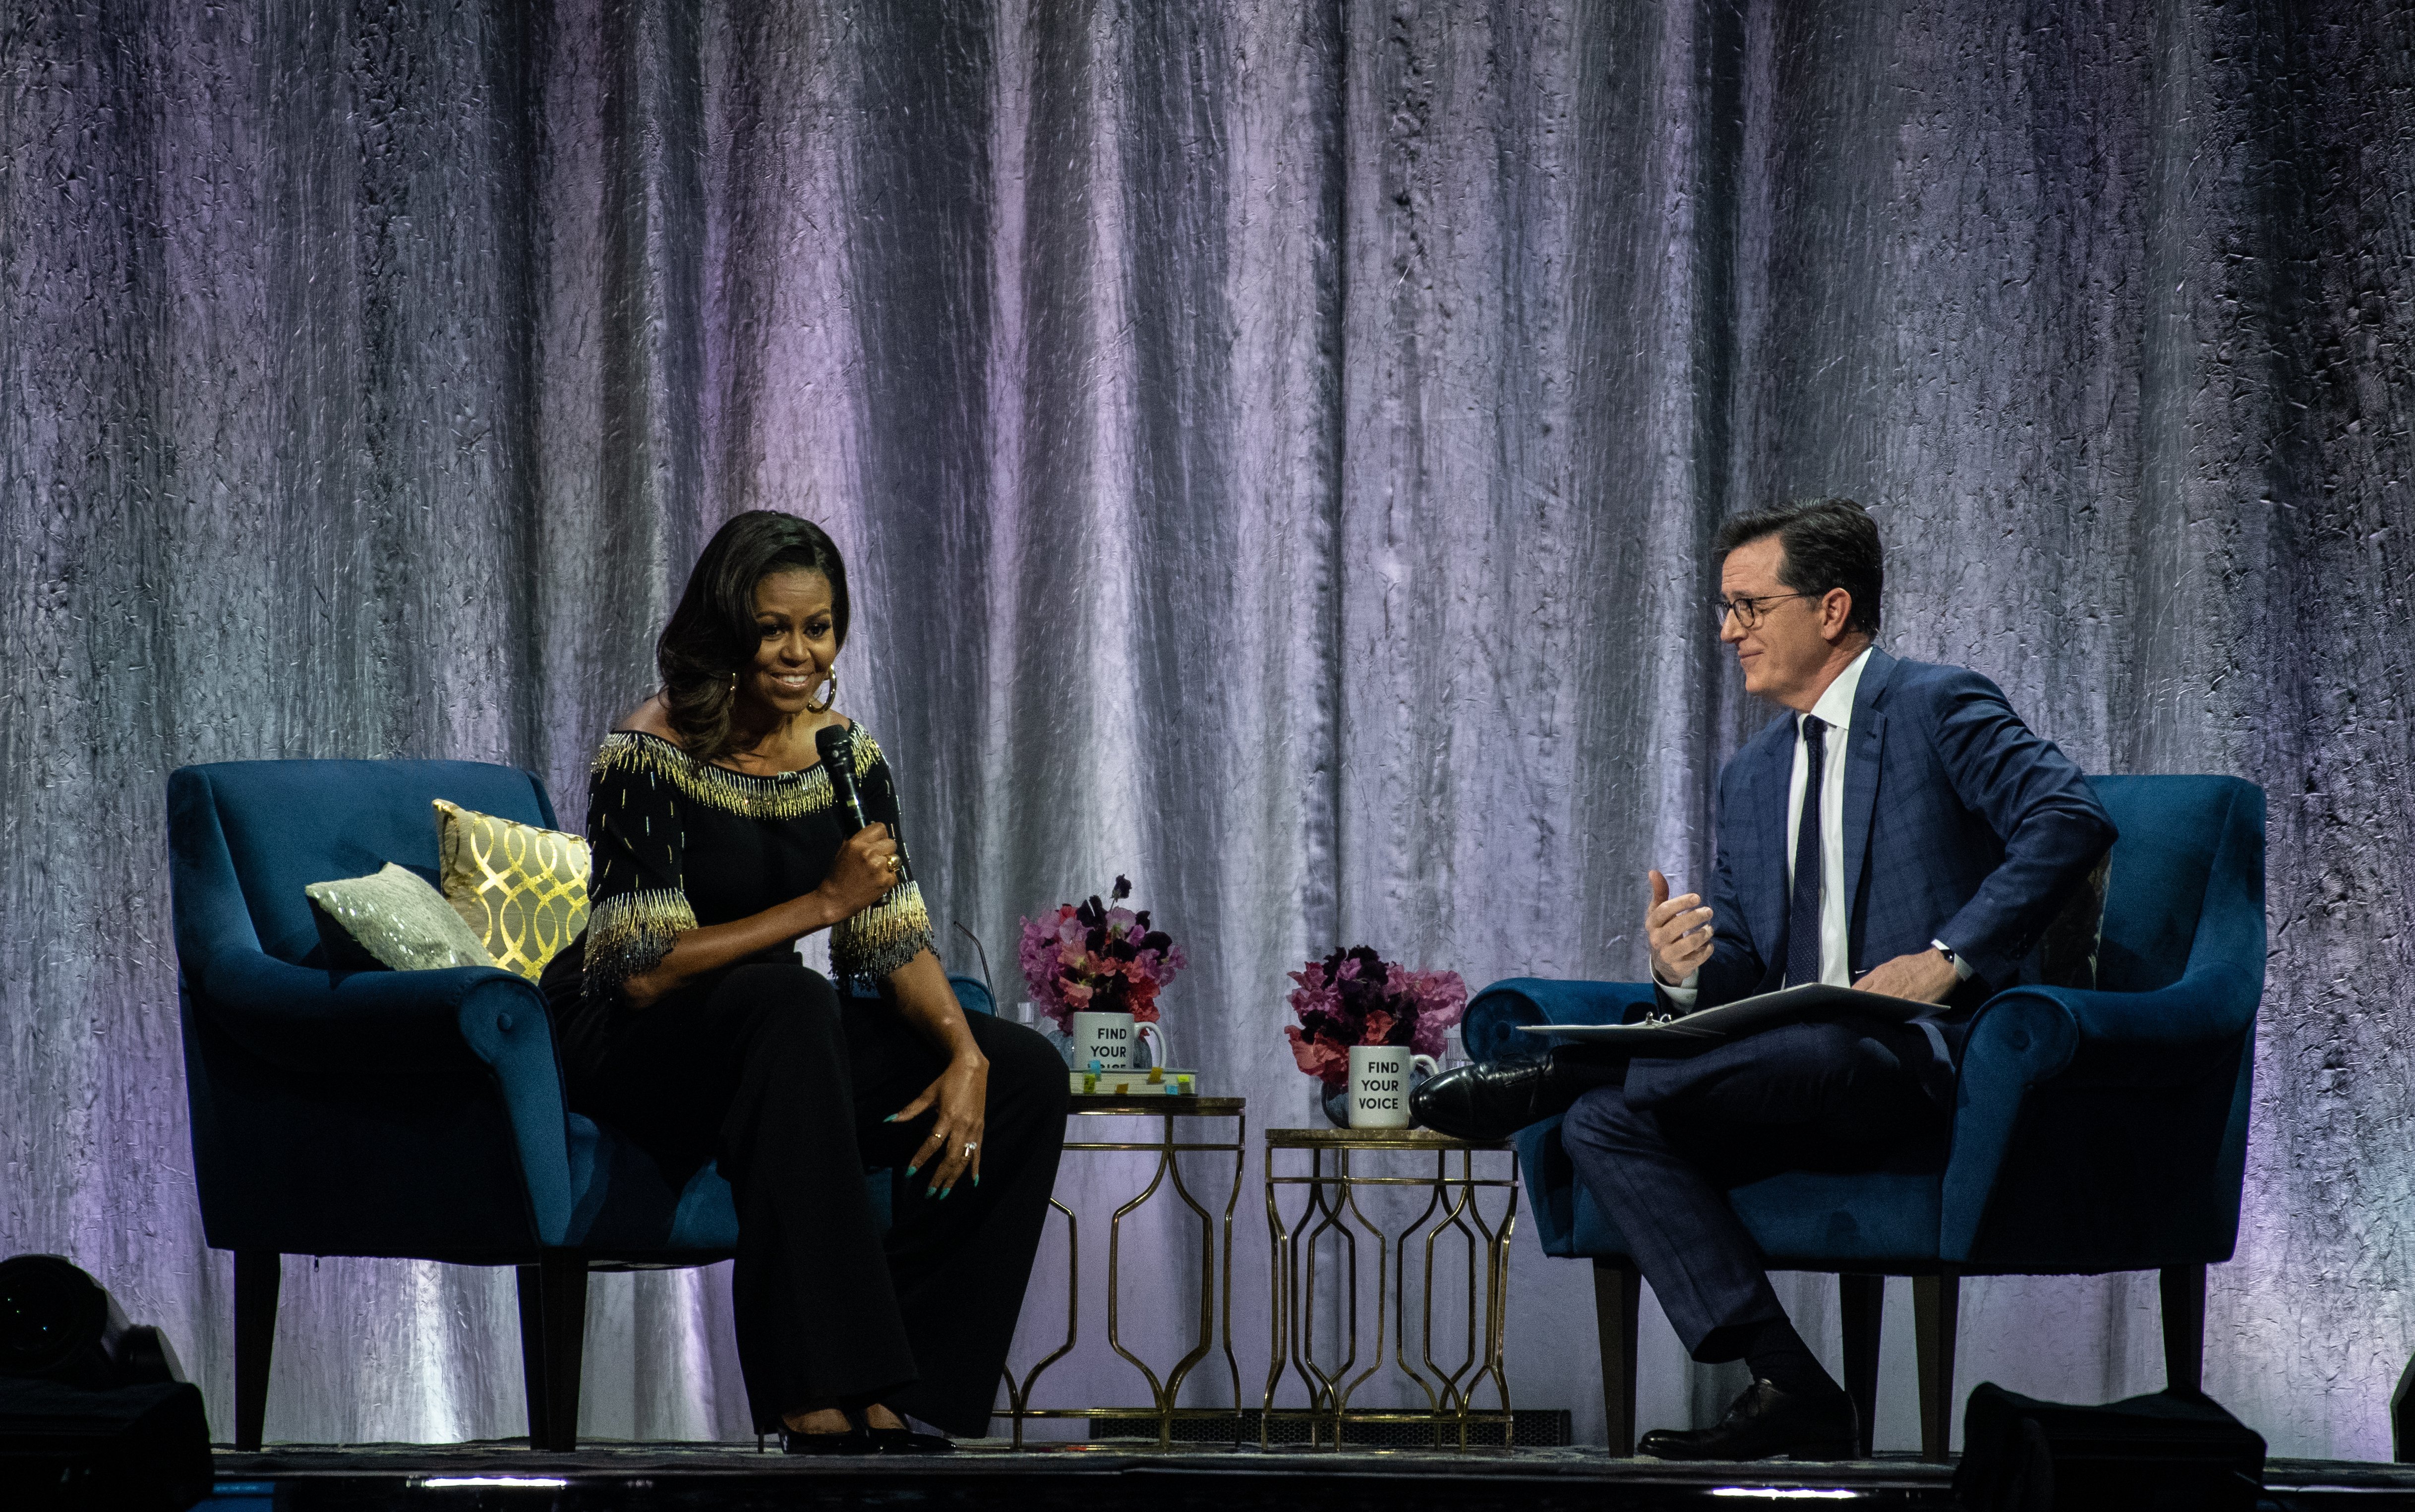 Michelle Obama on stage as part of her 'Becoming: An Intimate Conversation With Michelle Obama' tour at The O2 Arena on April 14, 2019 in London, England | Photo: Getty Images